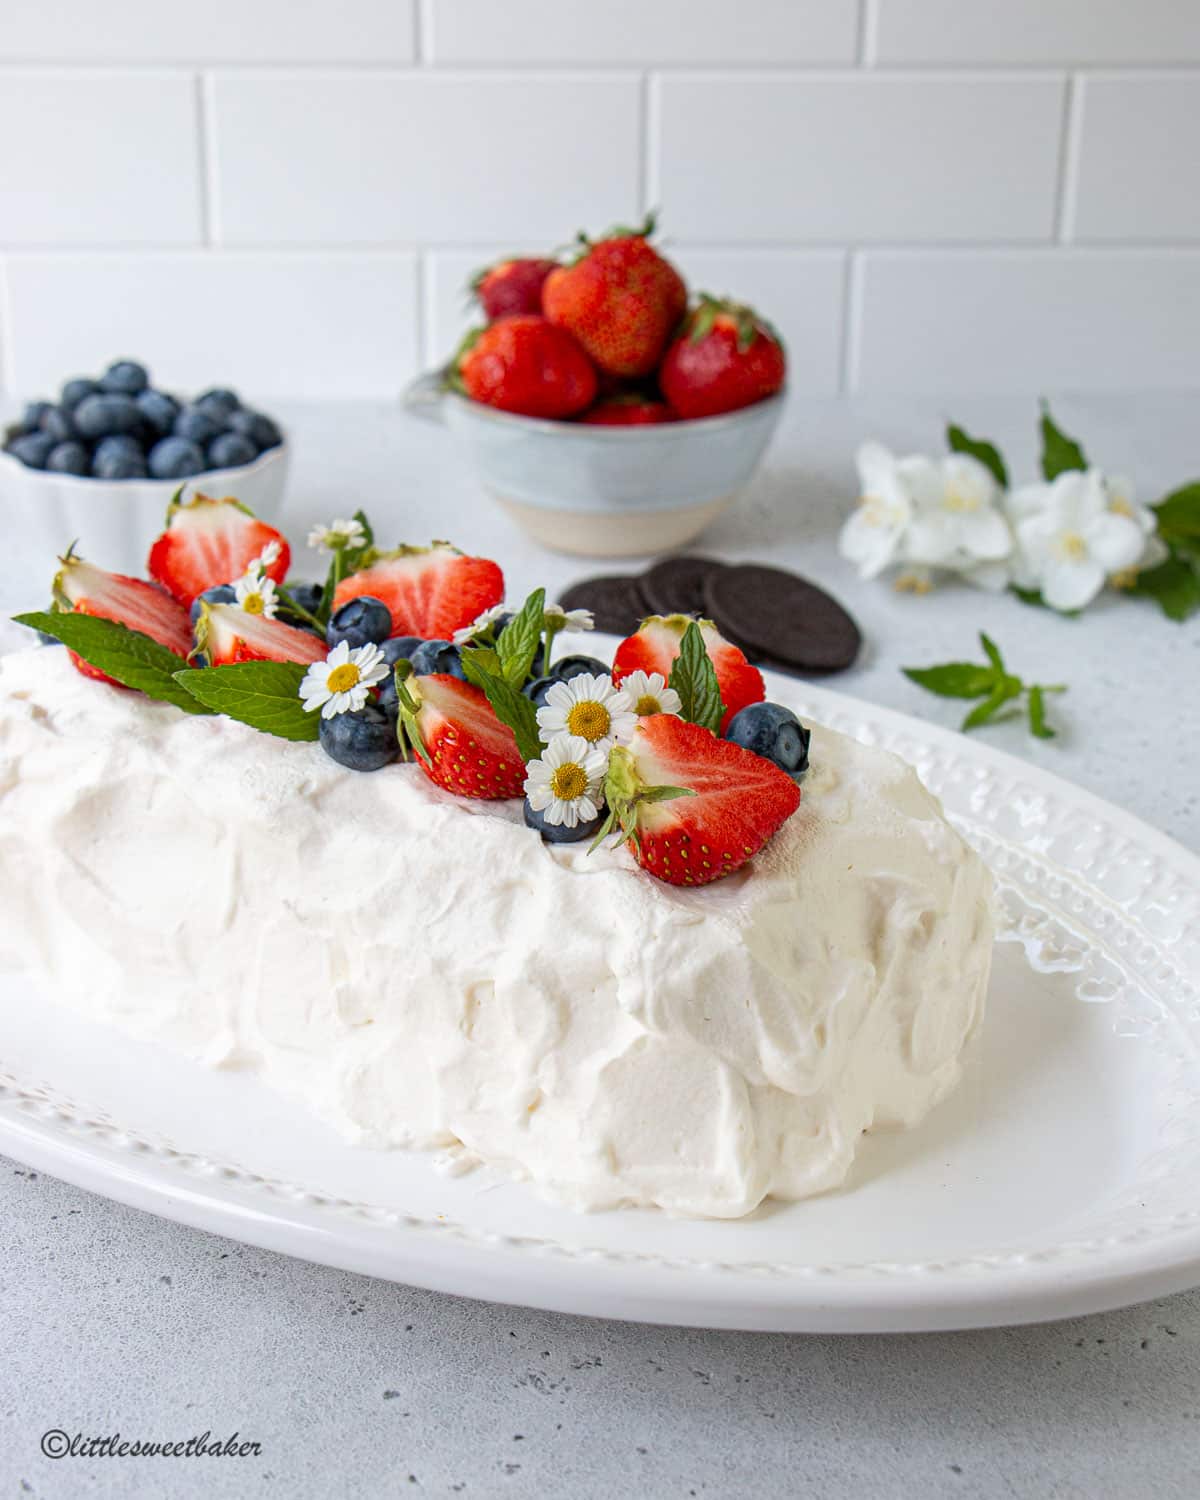 An icebox cake on a white plate topped with strawberries, blueberries, white flowers, and mint.